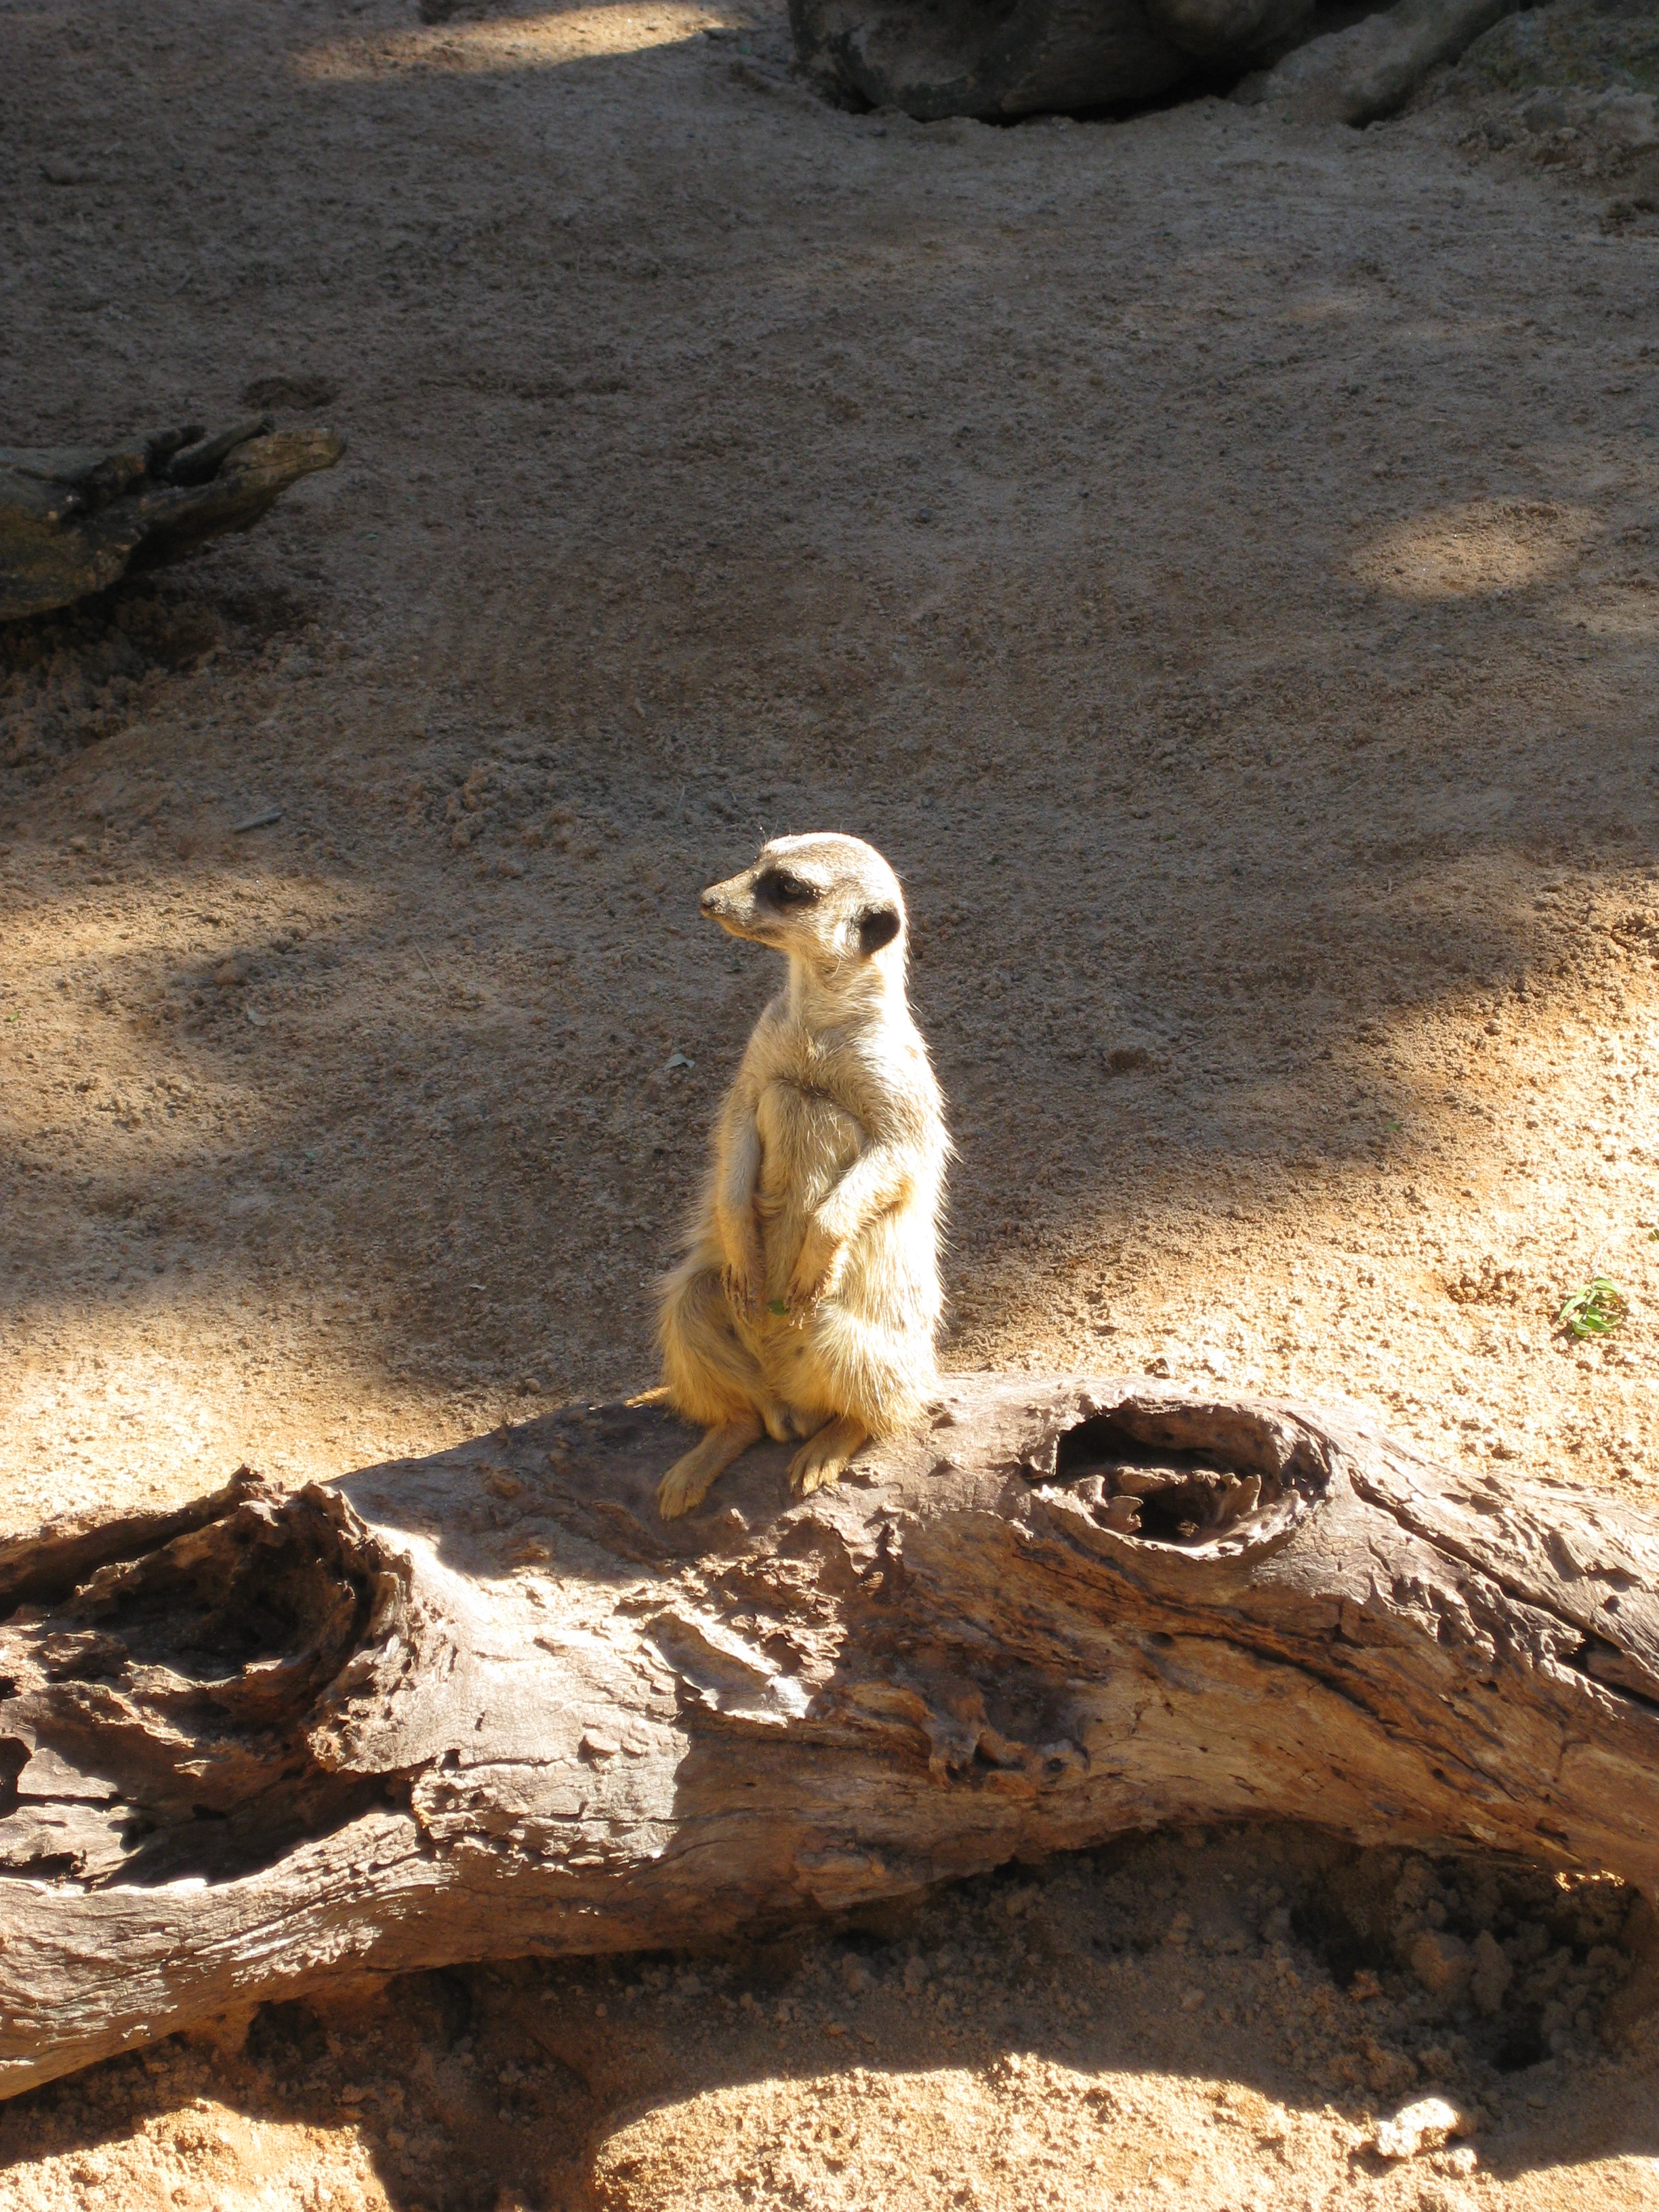 Why Did (or Didn't) the Meerkat Cross the Road? | Smart News ...